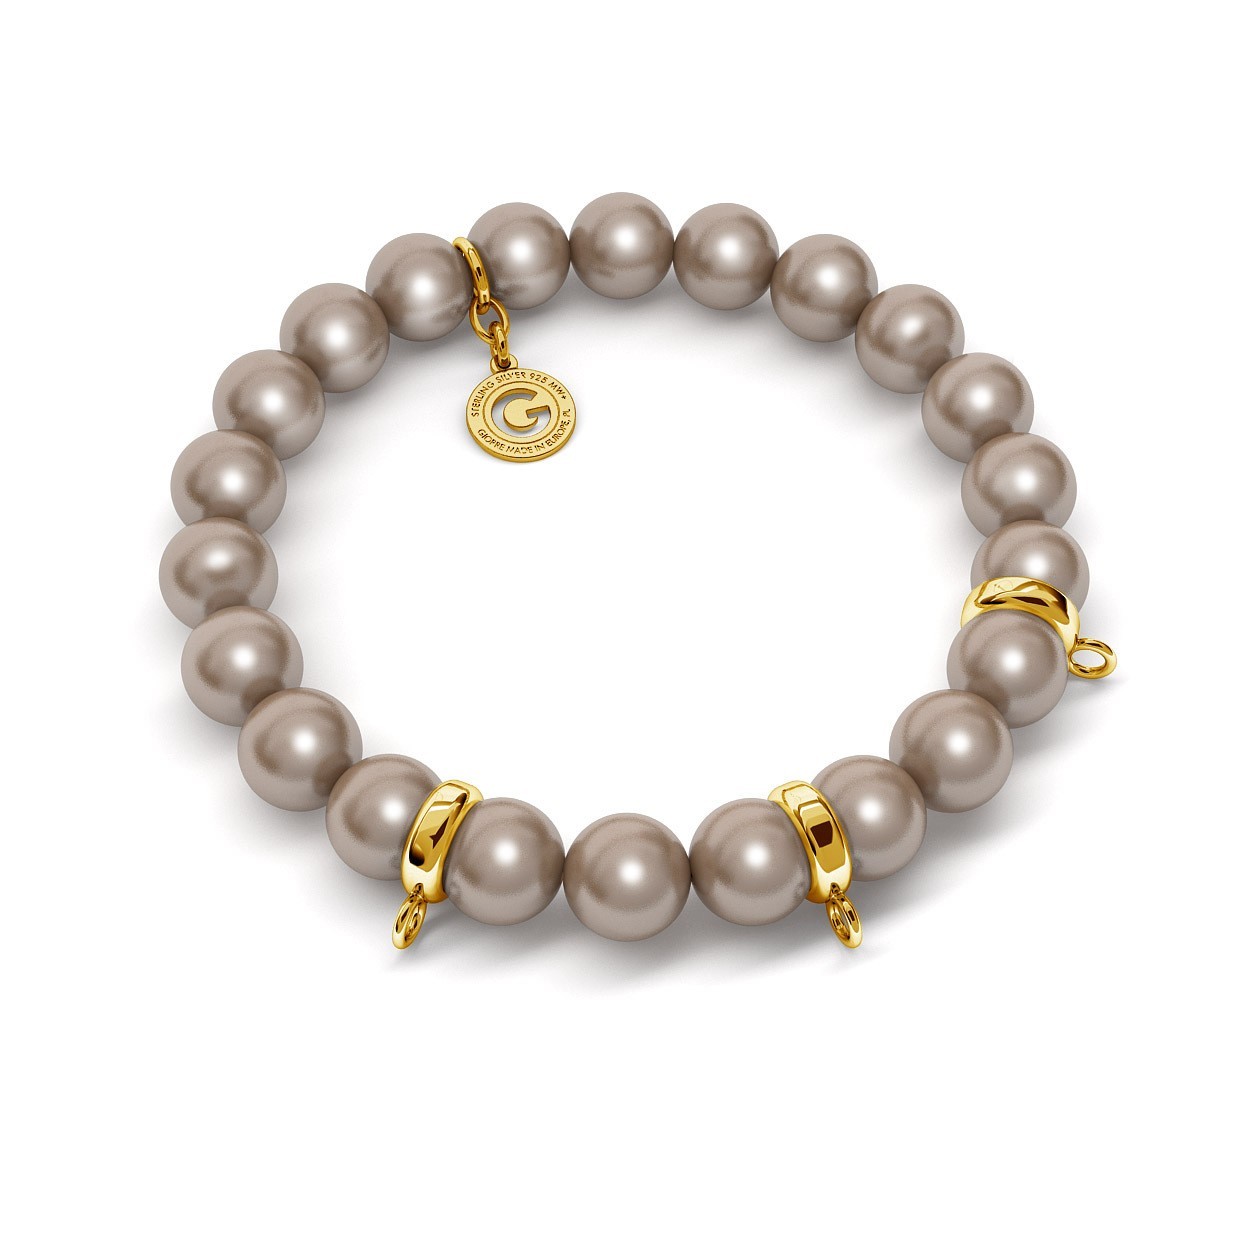 FLEXIBLE BRACELET WITH PEARLS (SWAROVSKI PEARL) FOR 3 CHARMS, SILVER 925, RHODIUM OR GOLD PLATED